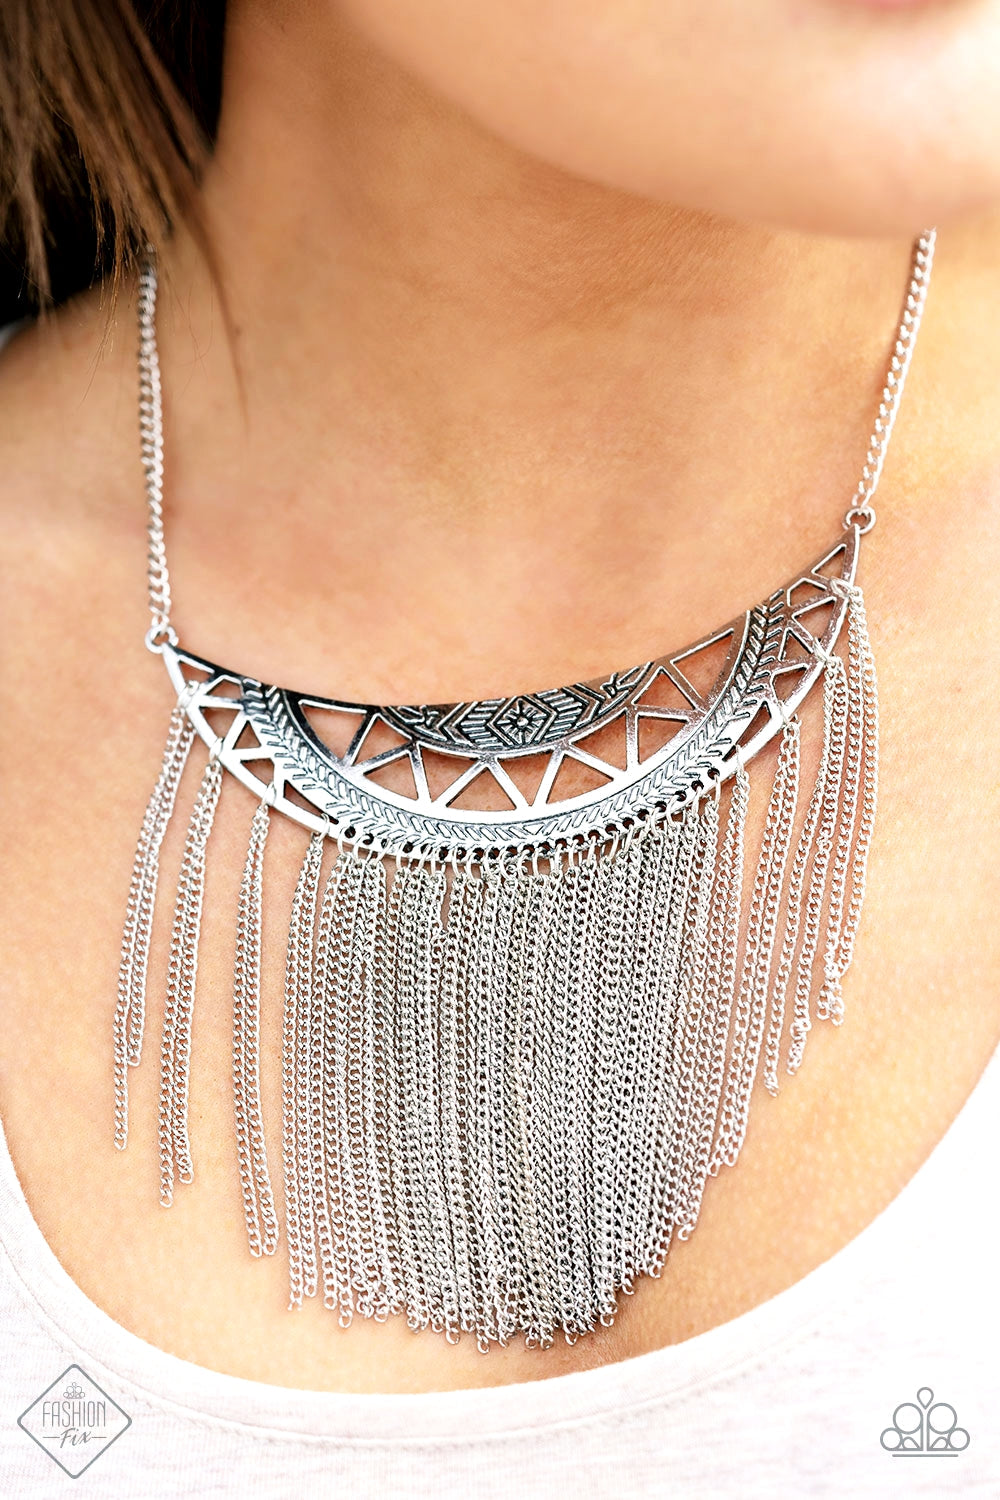 Empress Excursion - Silver Necklace - Paparazzi Accessories - A stenciled silver crescent stamped in tribal inspired patterns swings unapologetically below the collar. A curtain of shimmery silver chains cascades from the bottom of the dramatic pendant, creating a bold fringe with endless movement. Features an adjustable clasp closure. Sold as one individual necklace.